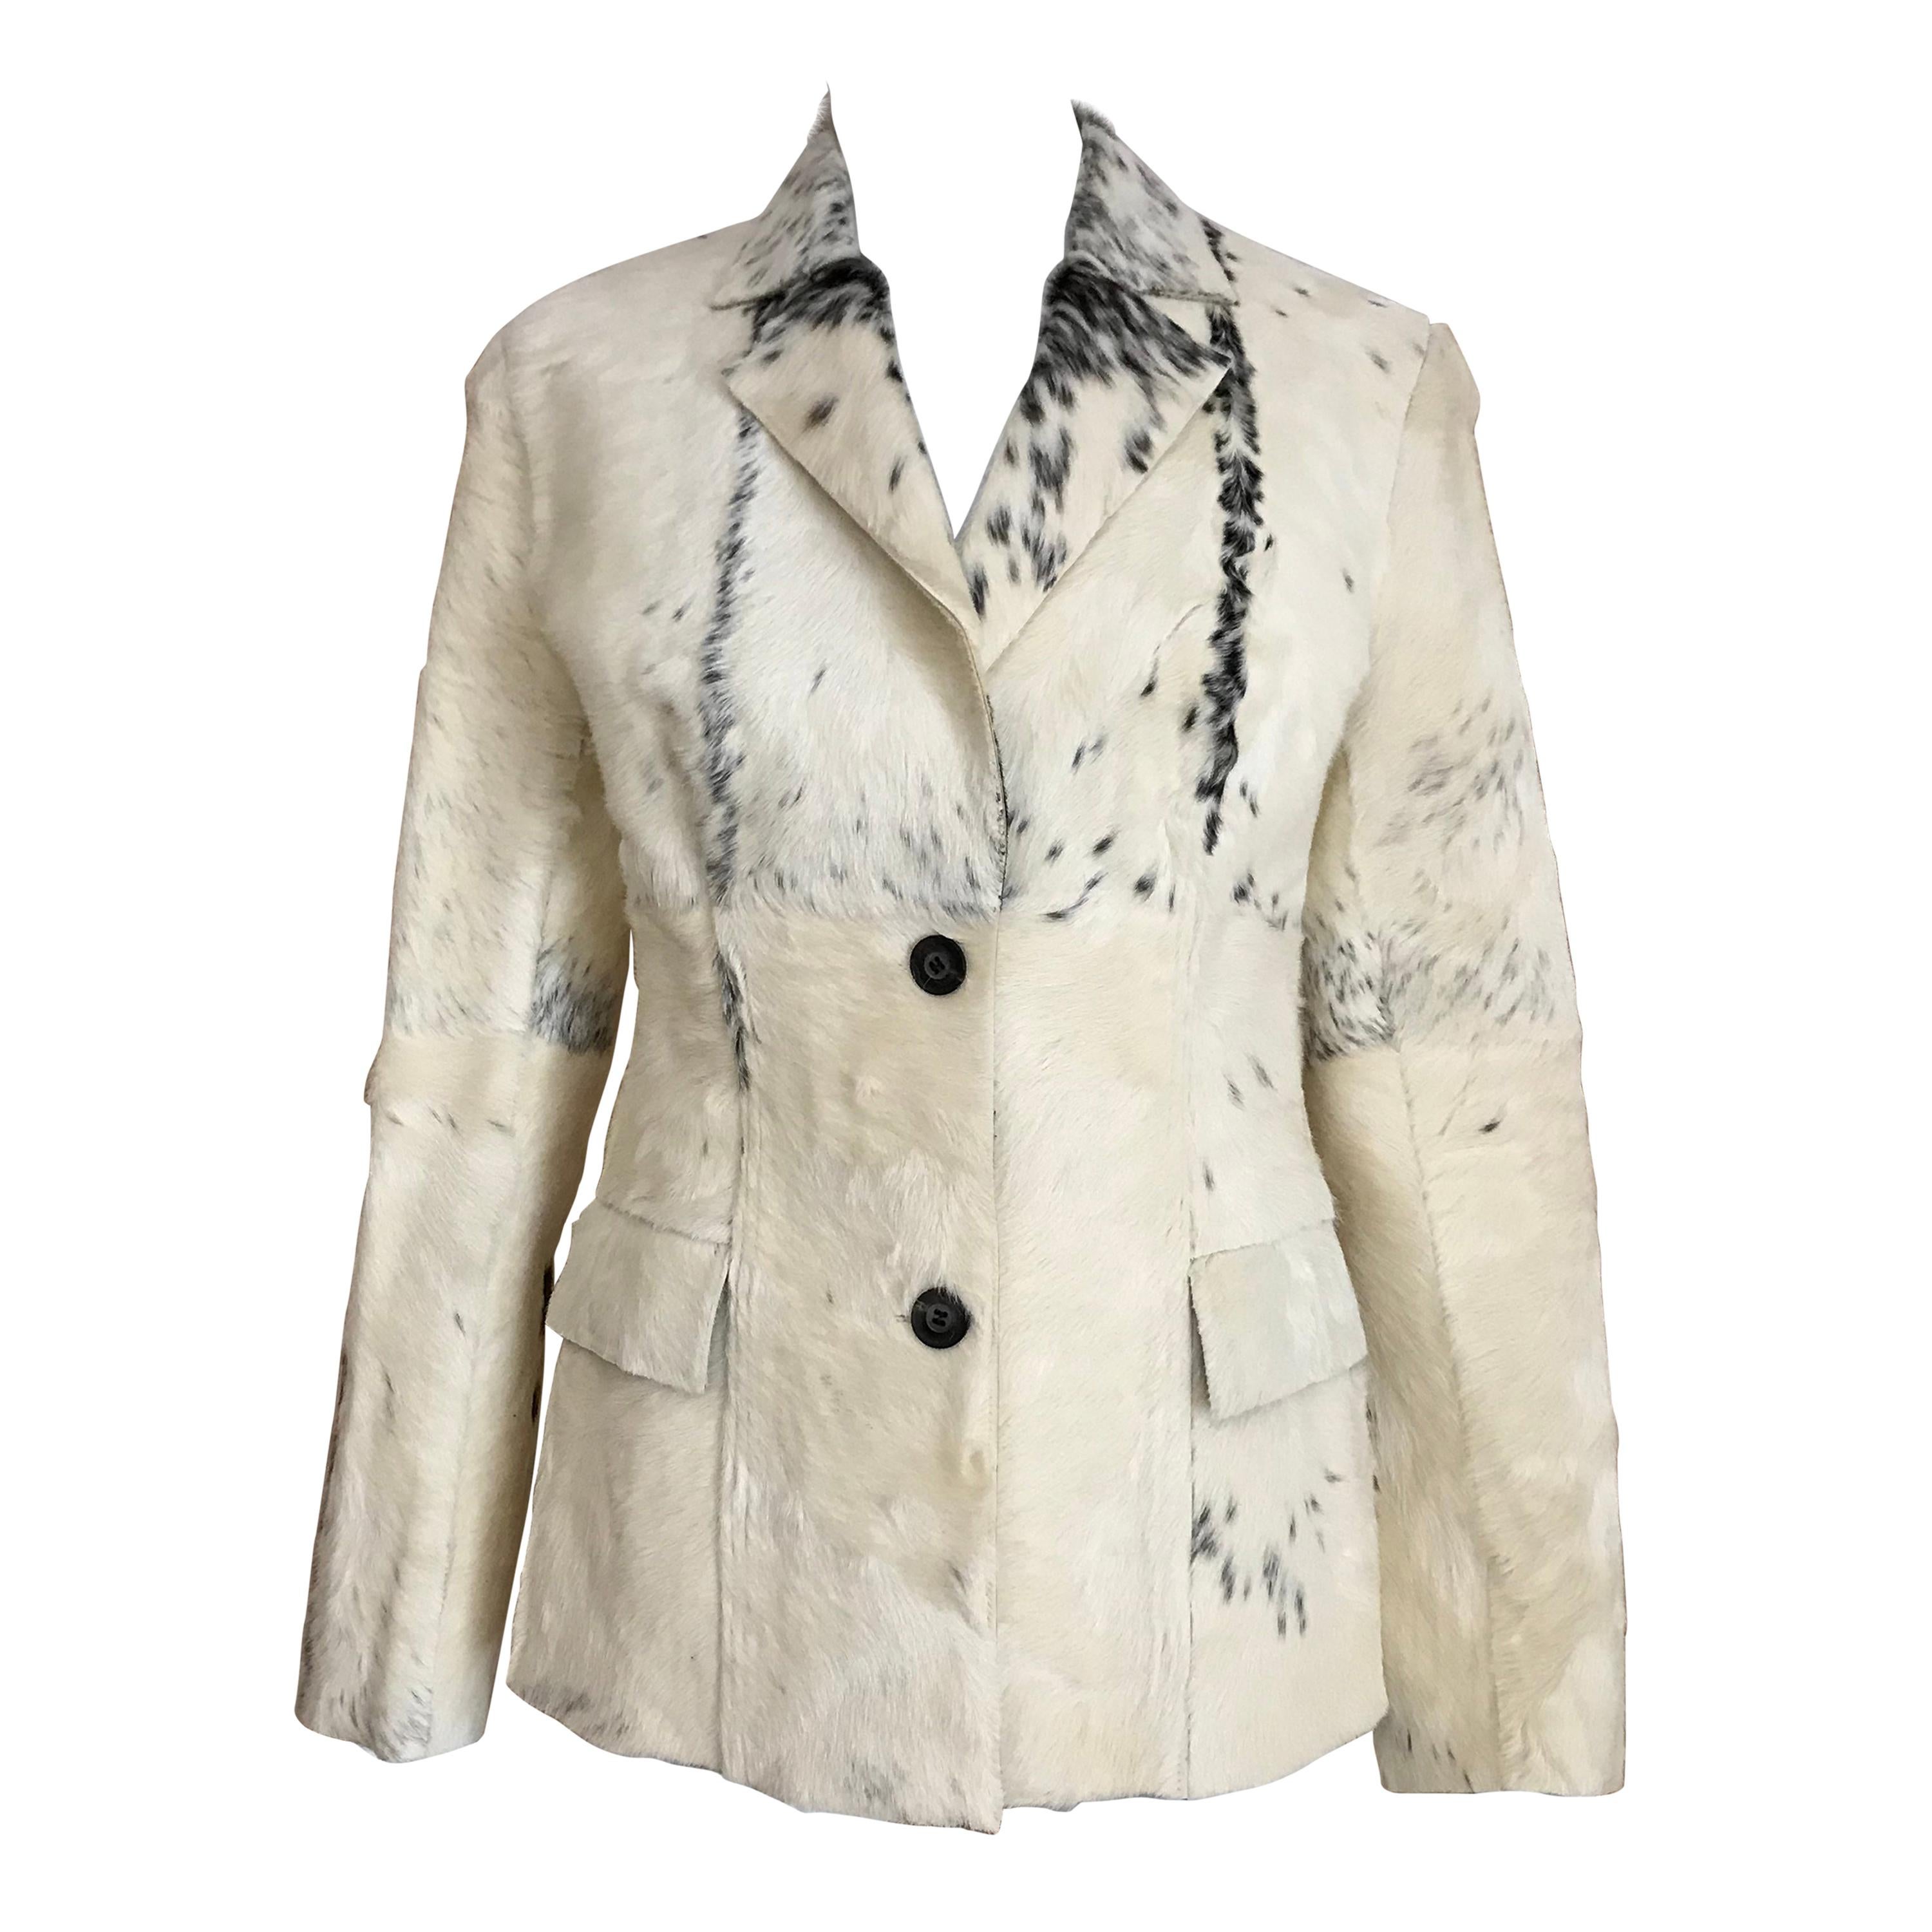 Gucci by Tom Ford Creme Pony Hair Jacket